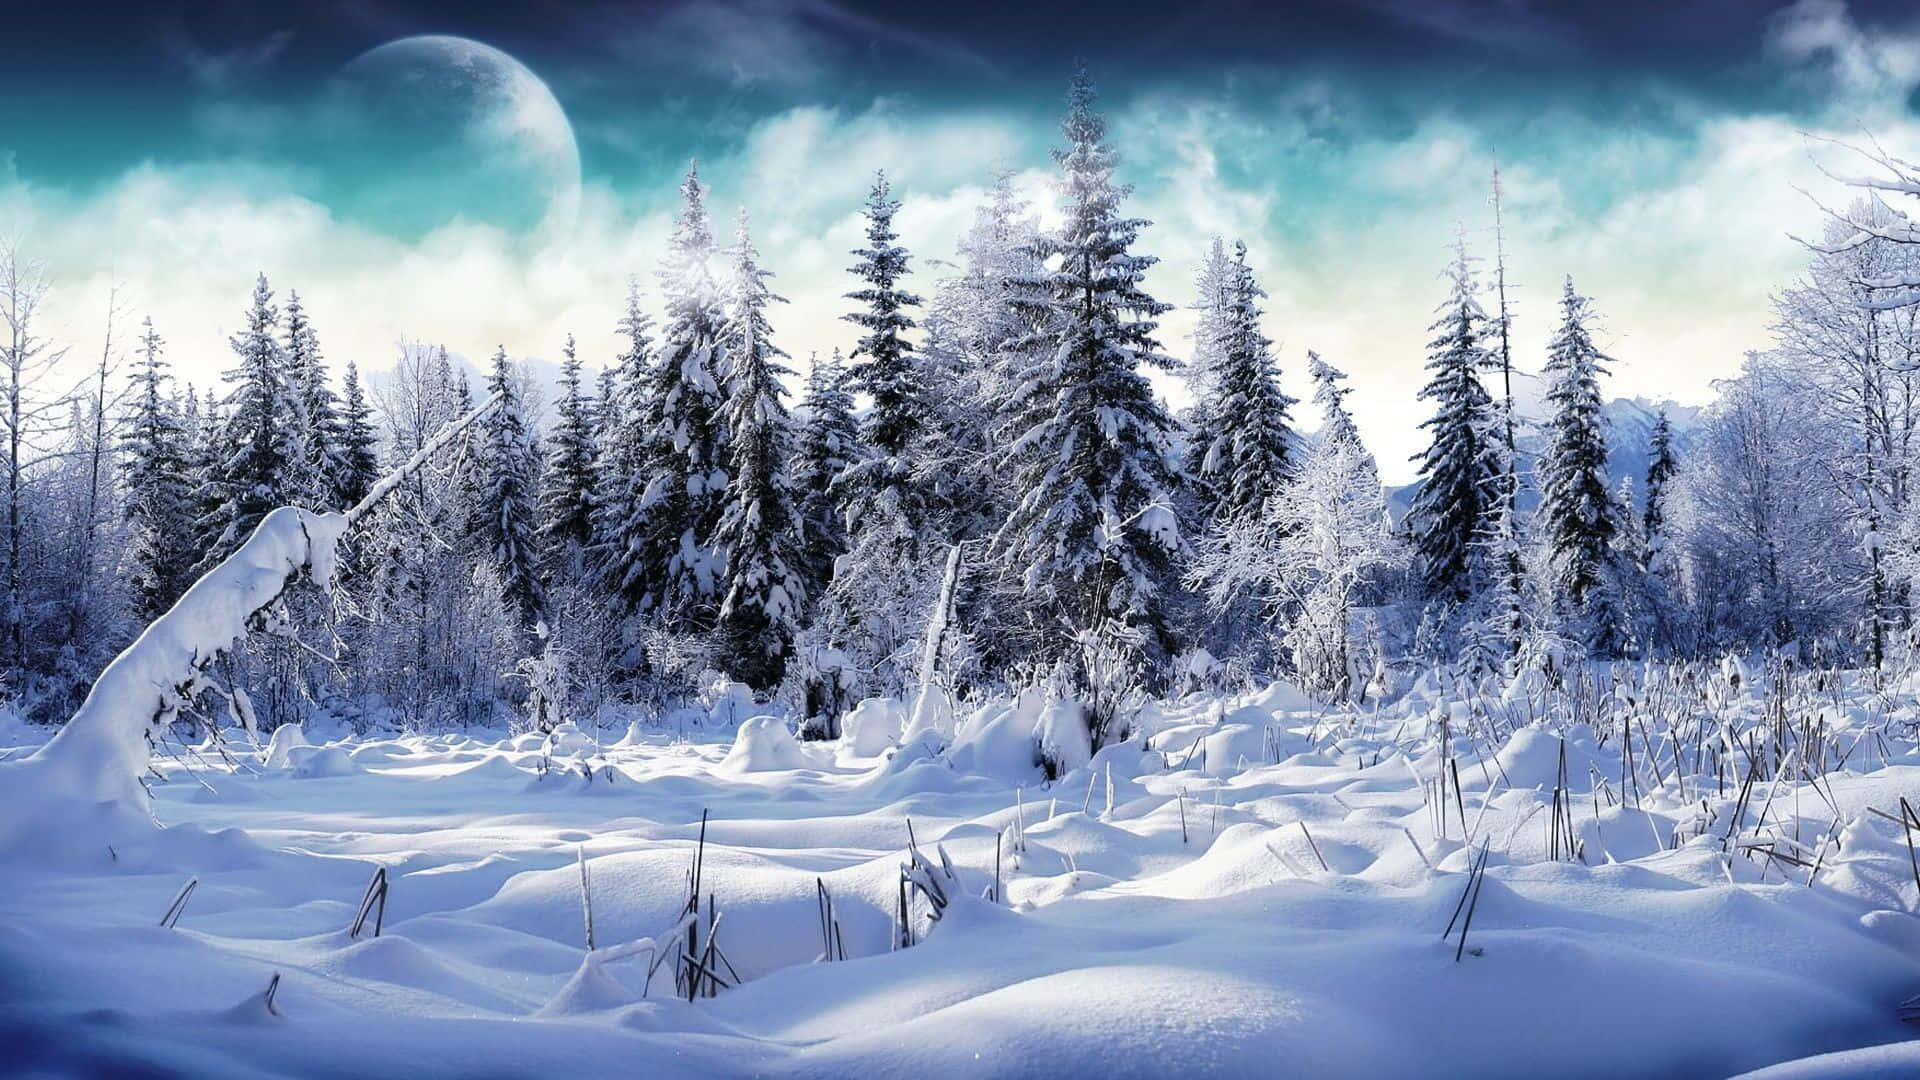 Snow Plummeting Down In A Peaceful Winter Landscape Background